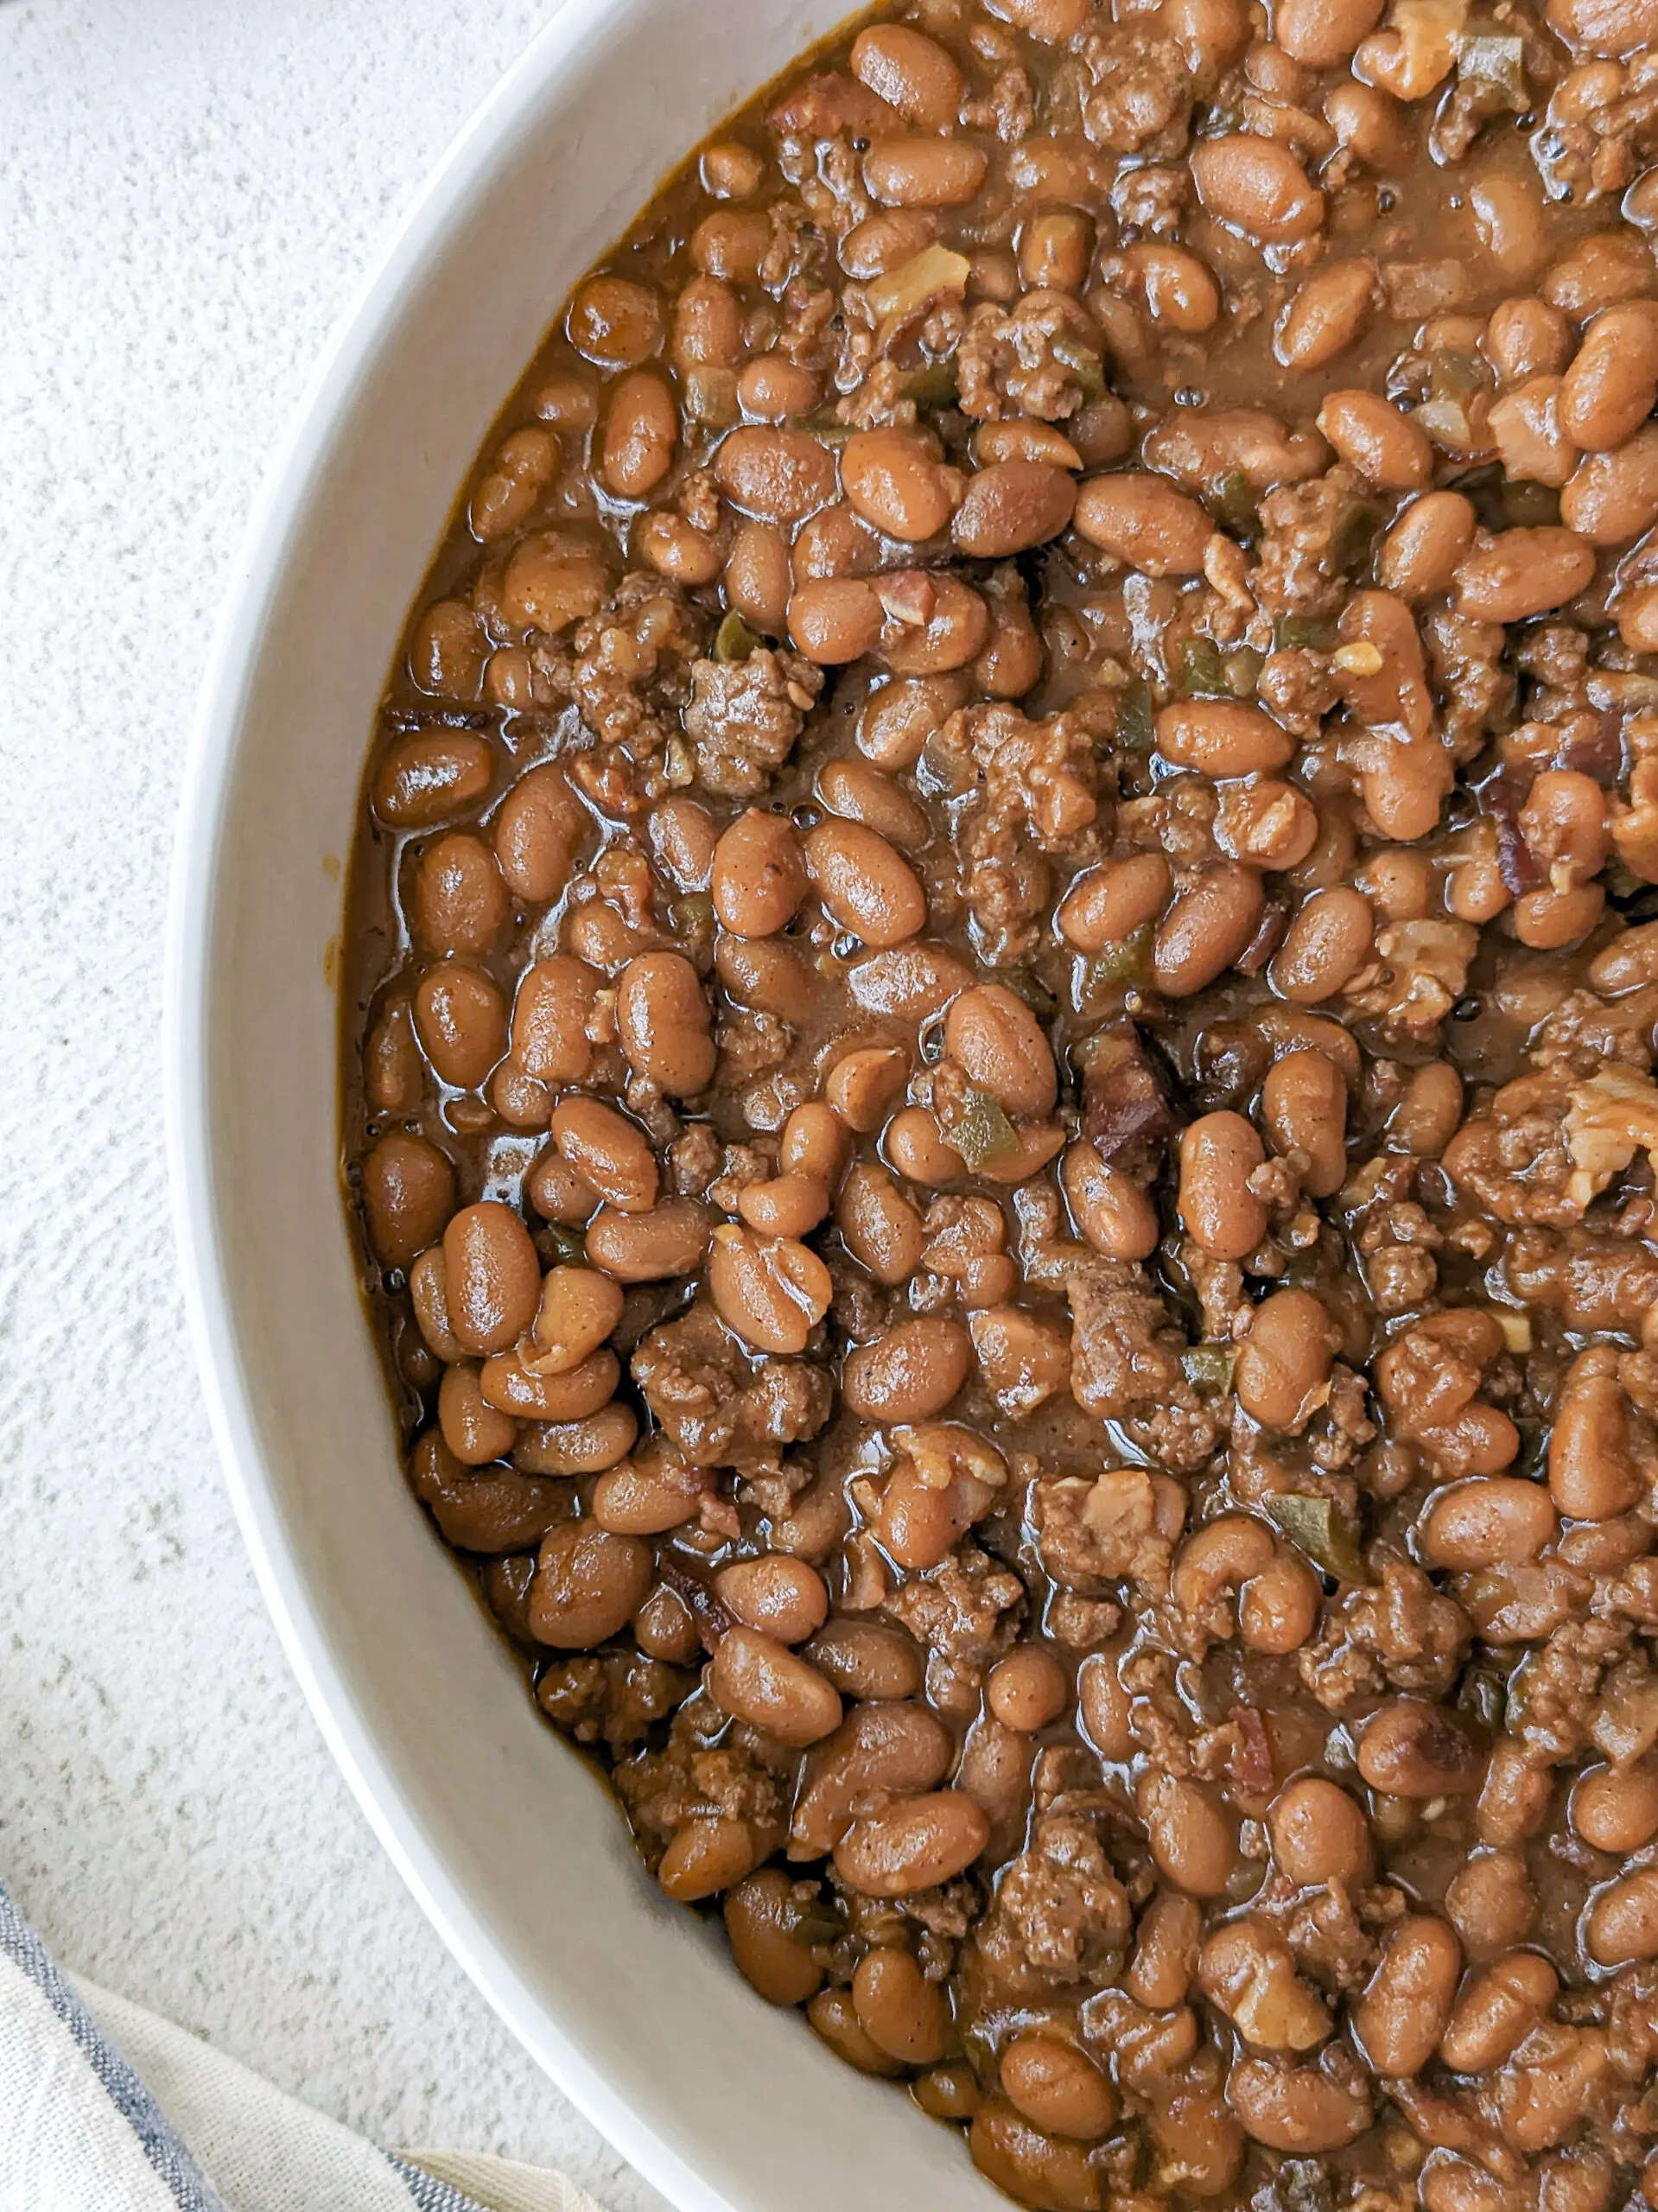 Baked beans in a serving bowl.